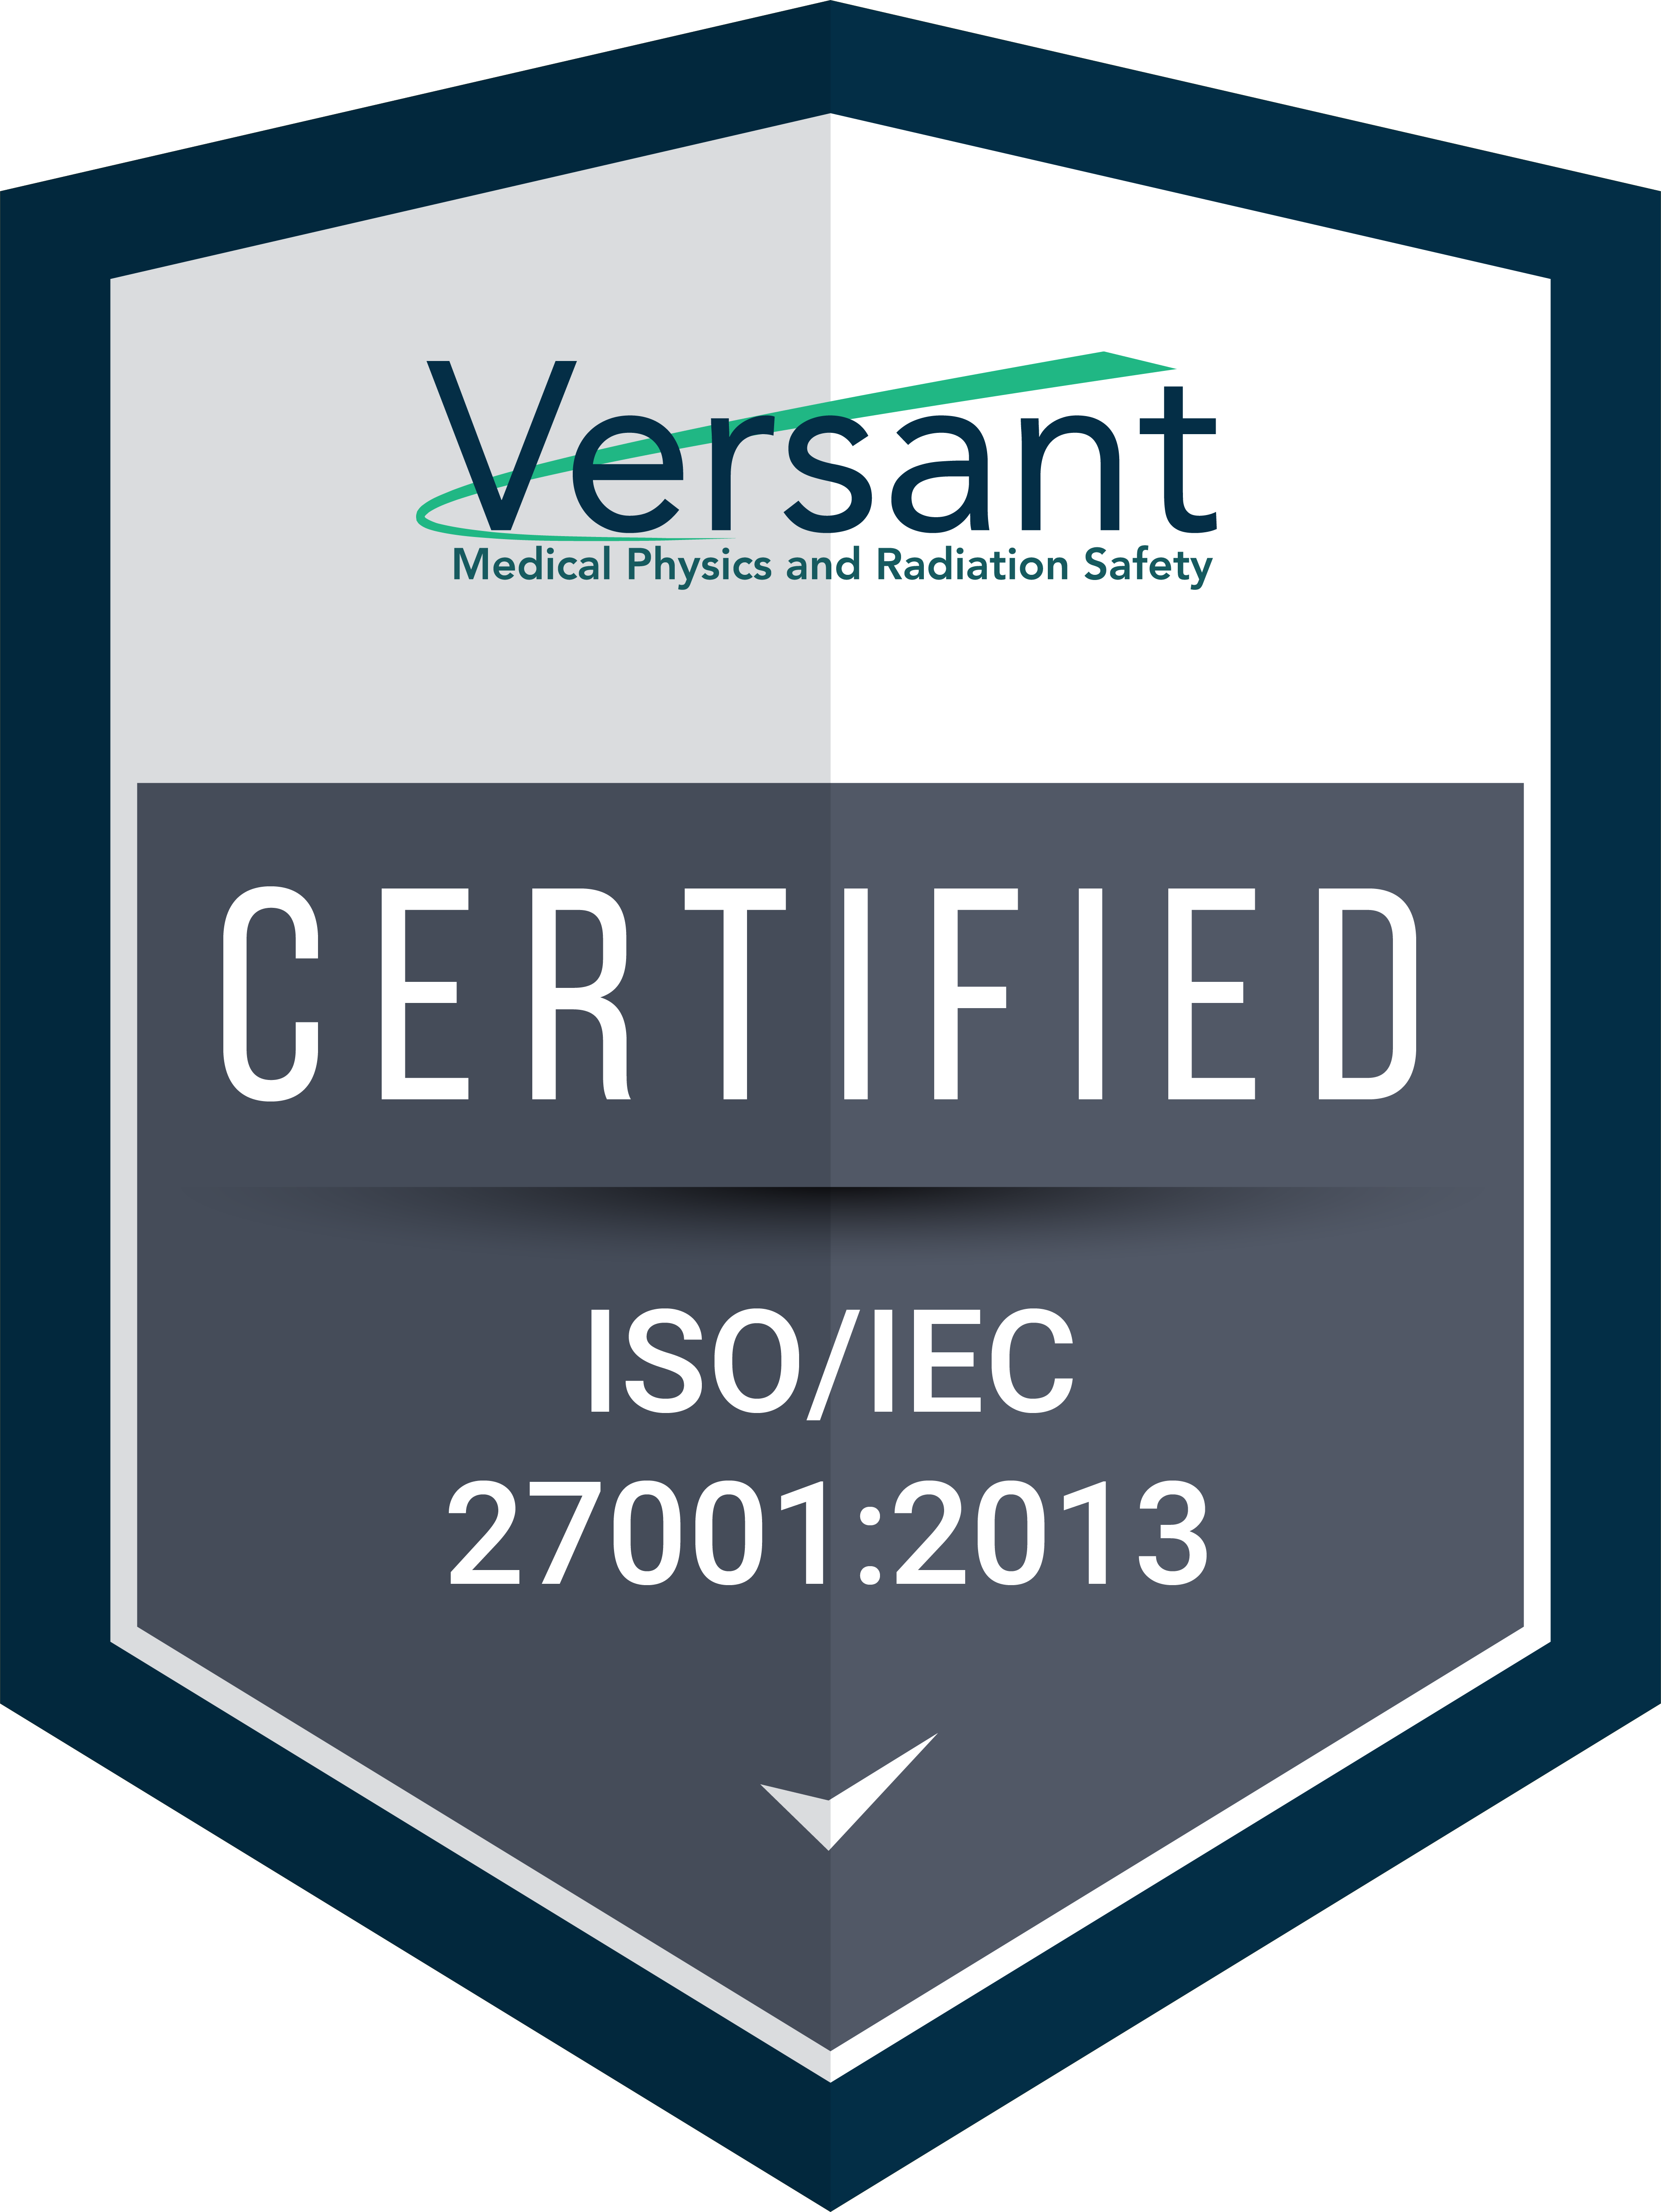 Versant Medical Physics and Radiation Safety ISO/IEC 27001:2013 Certification